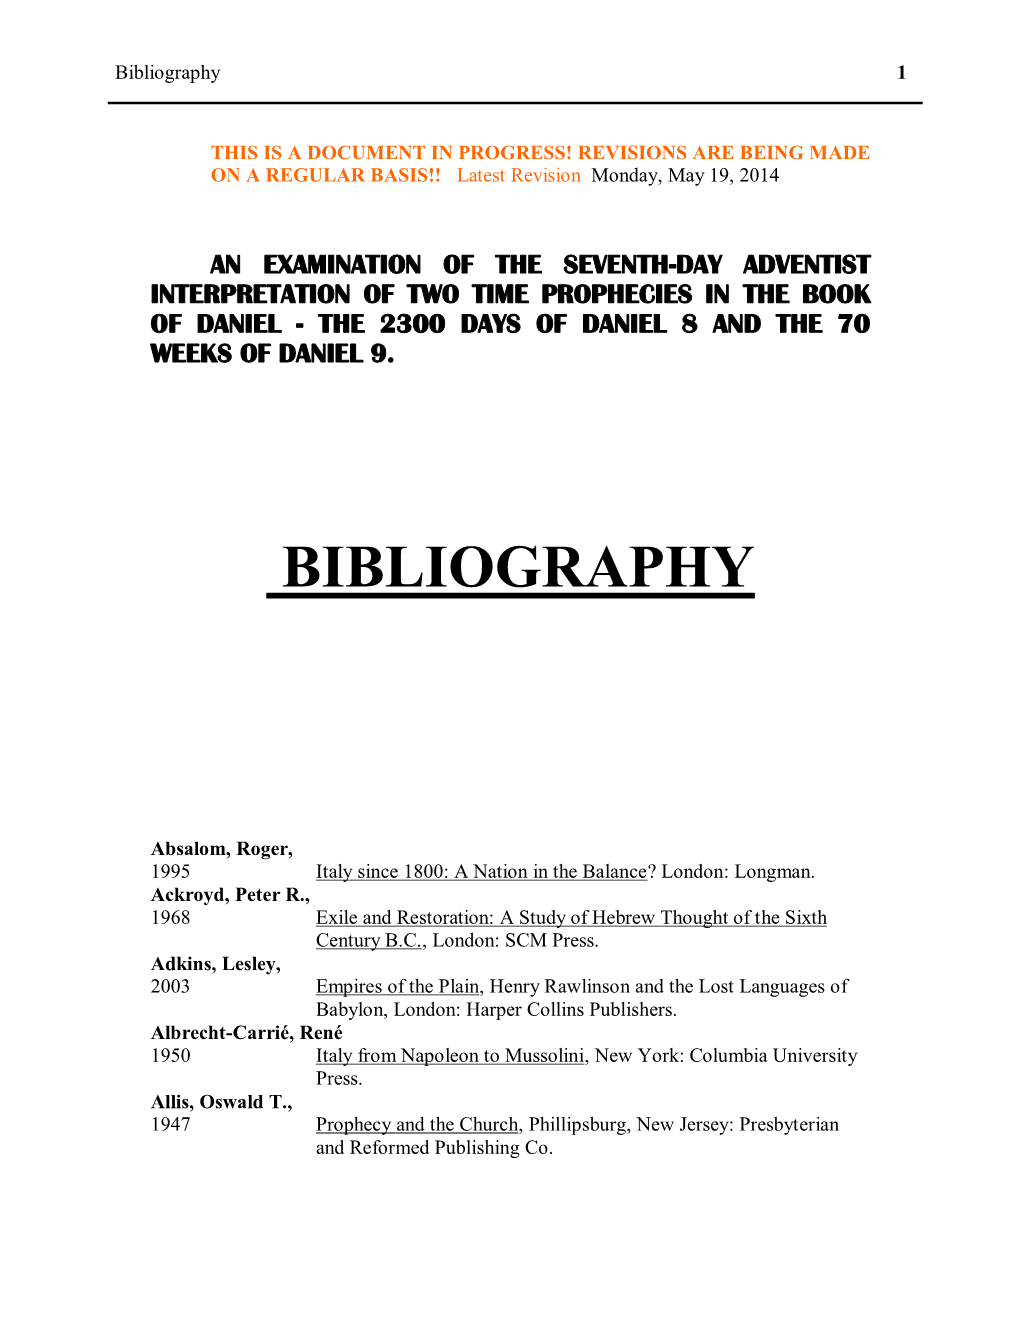 General Bibliography for Documents on This Website